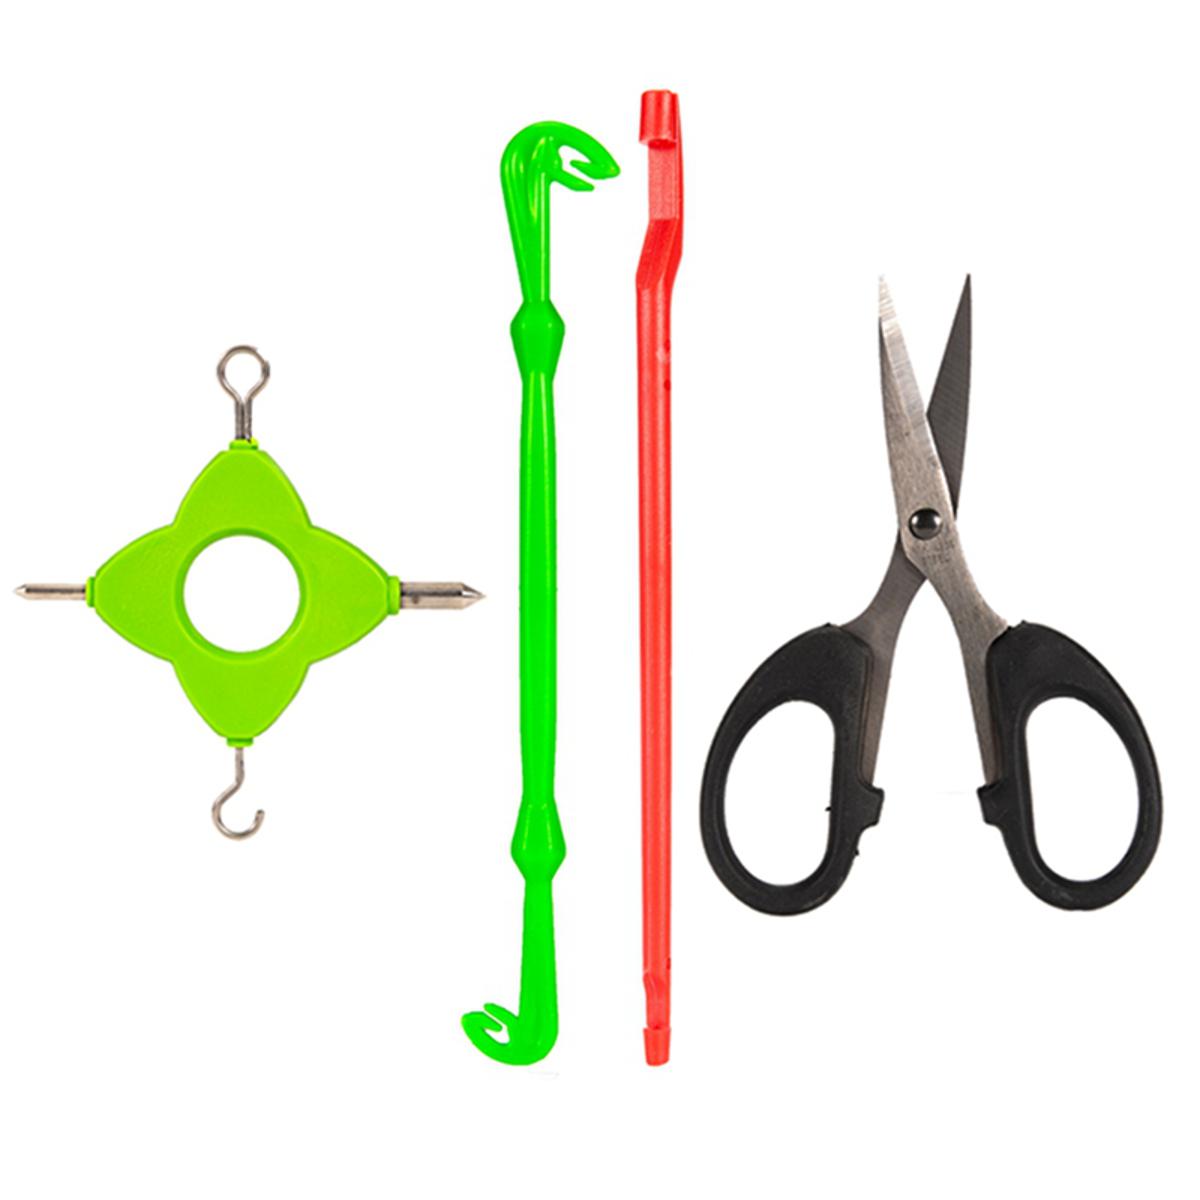 Knotter Puller Tool Fishing Carp Knot Multi Puller Tool with Scissors for Rig  Making Method Fishing Tackle